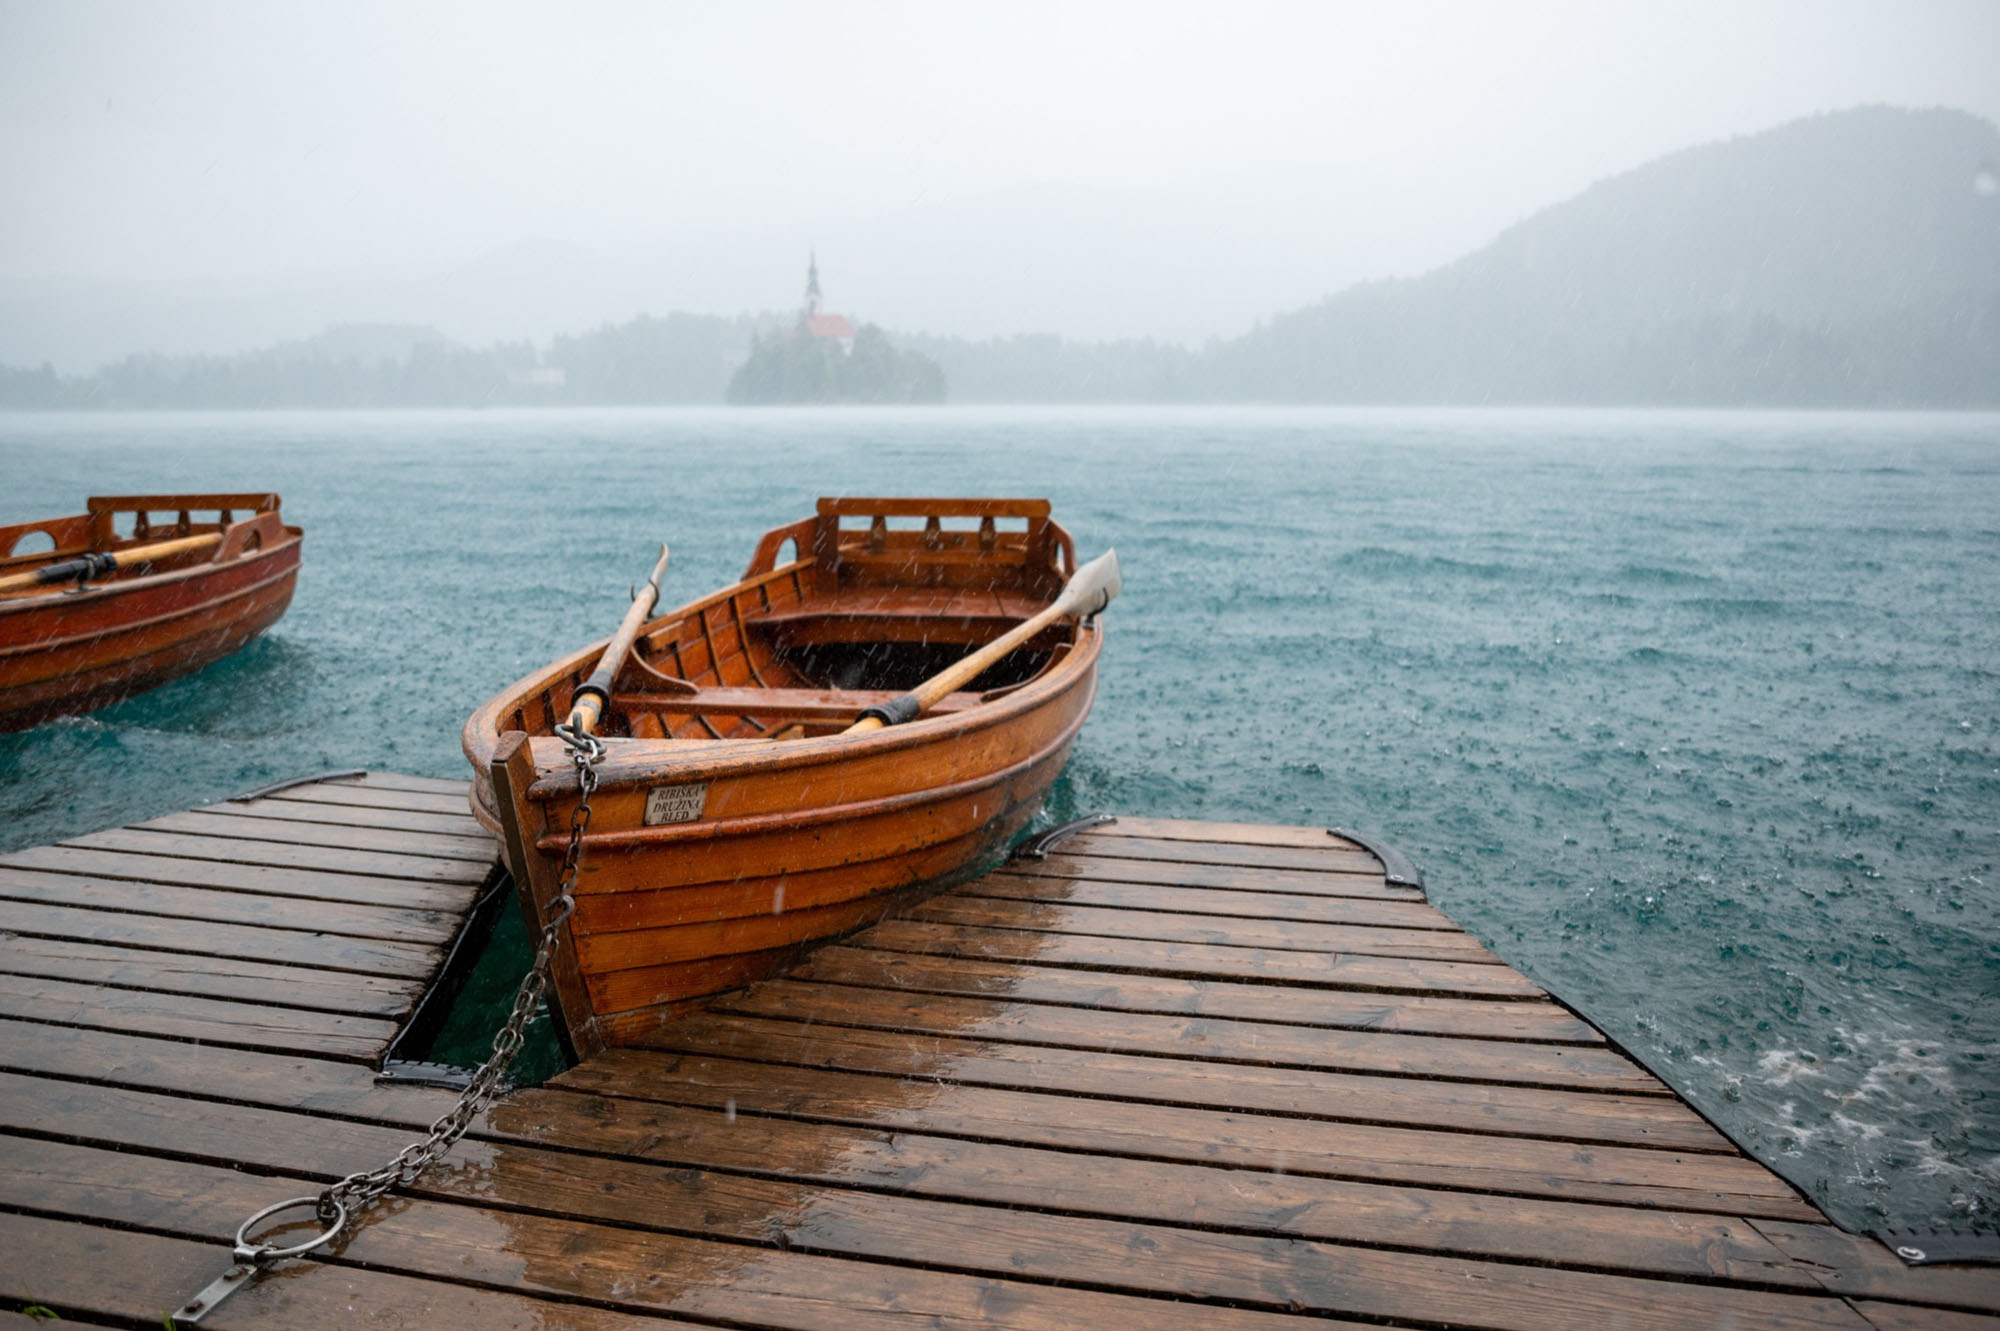 Photo: The Slovenian Olympic rowing team boat is shown docked at a wooden dock as it rains heavily at Lake Bled. The raindrops can be seen dramatically hitting the water. In the distance, a large boar is seen heading towards the dock.